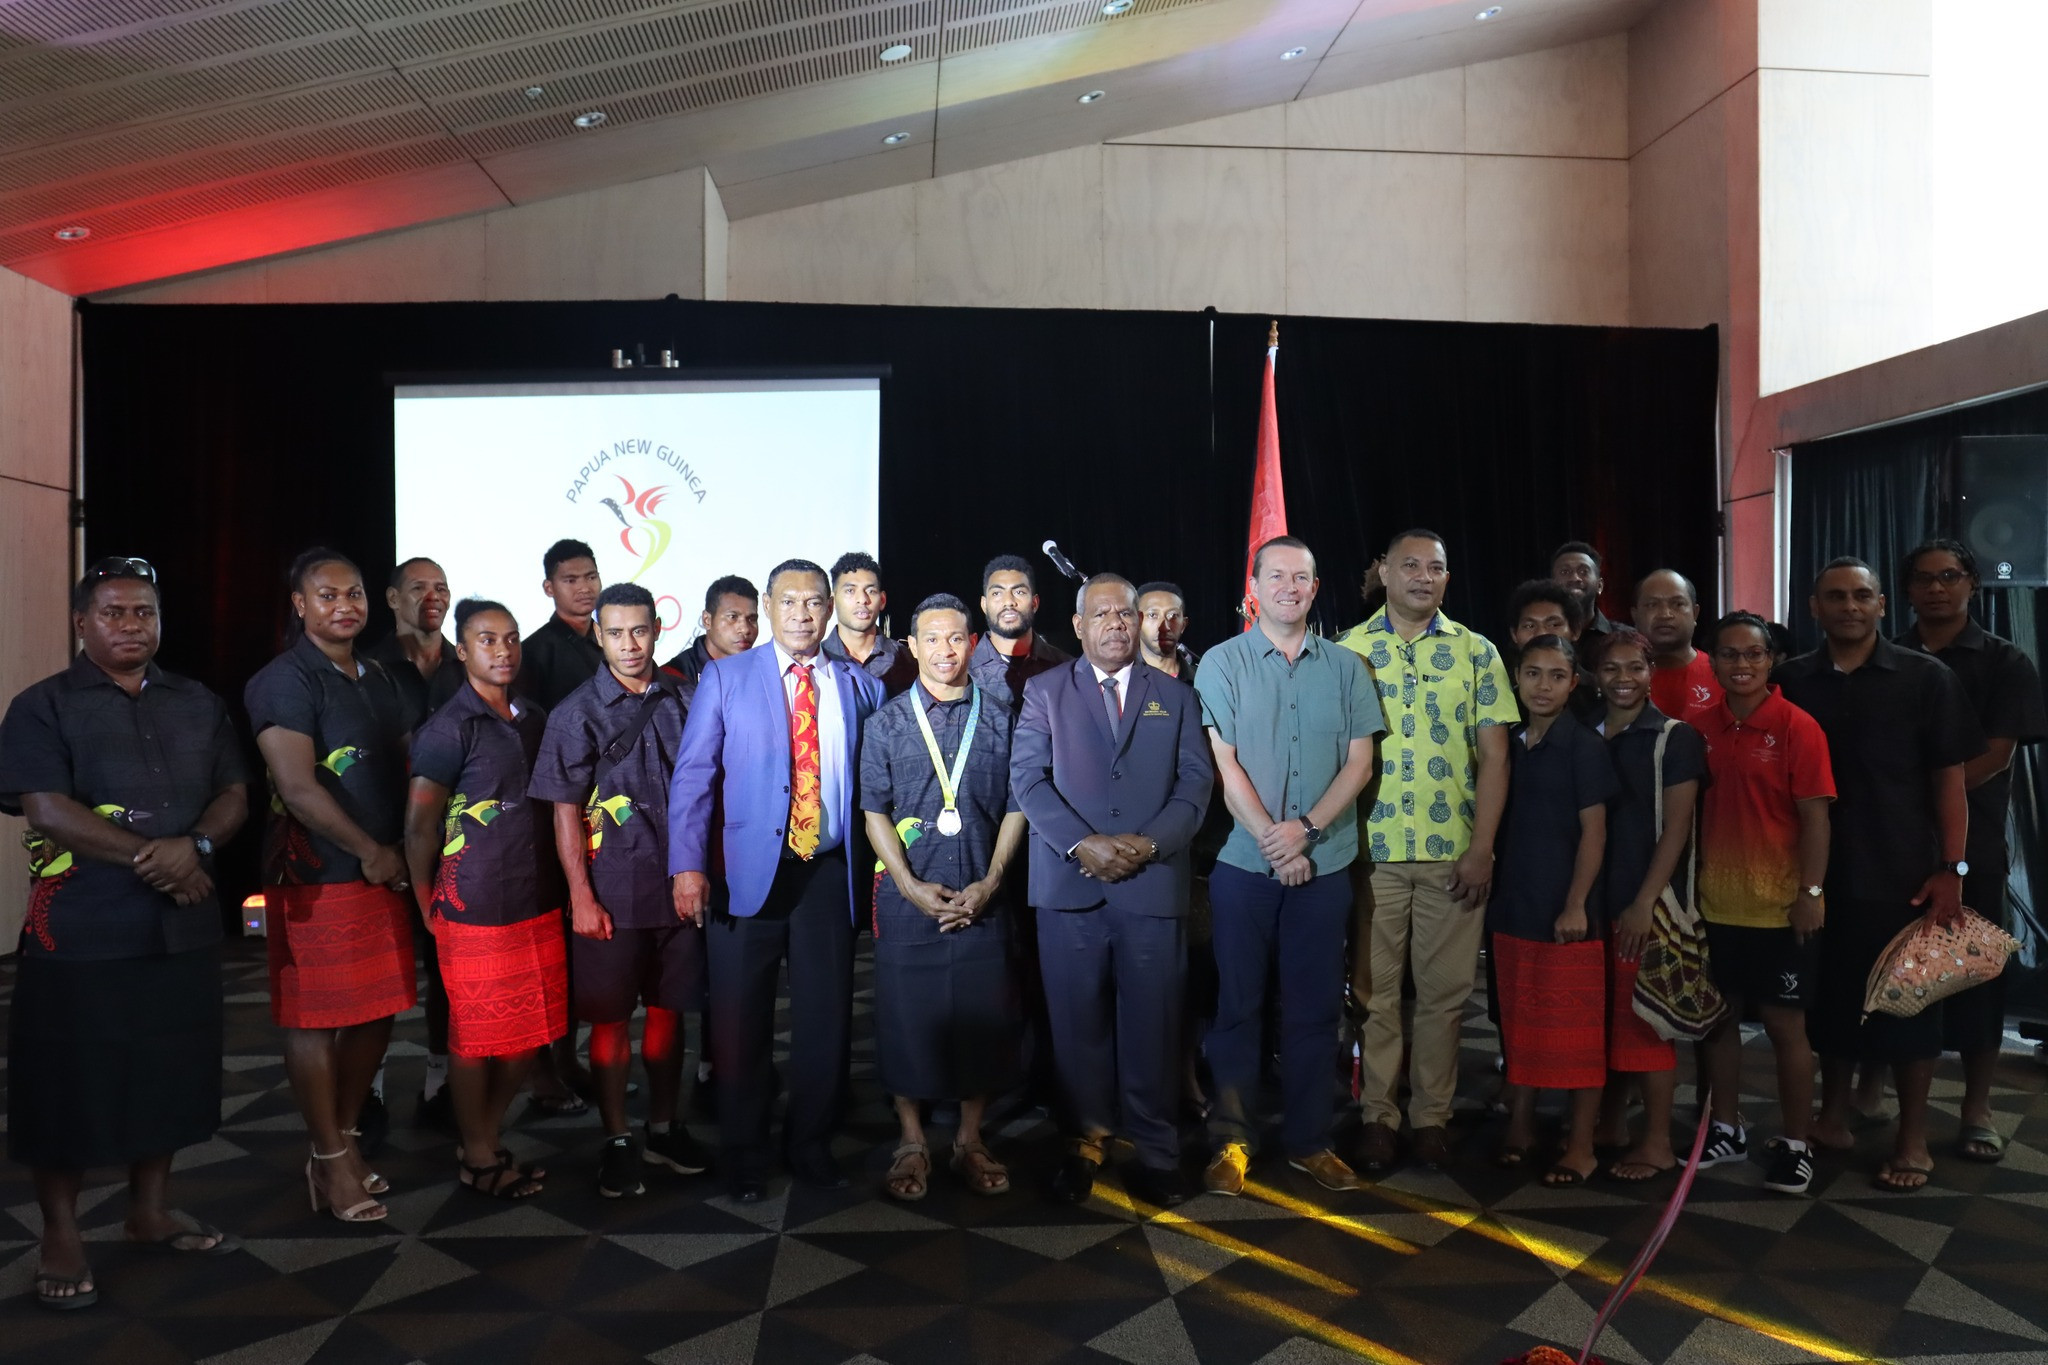 PNGOC hosted a welcome event for its athletes who competed at Birmingham 2022 ©PNGOC